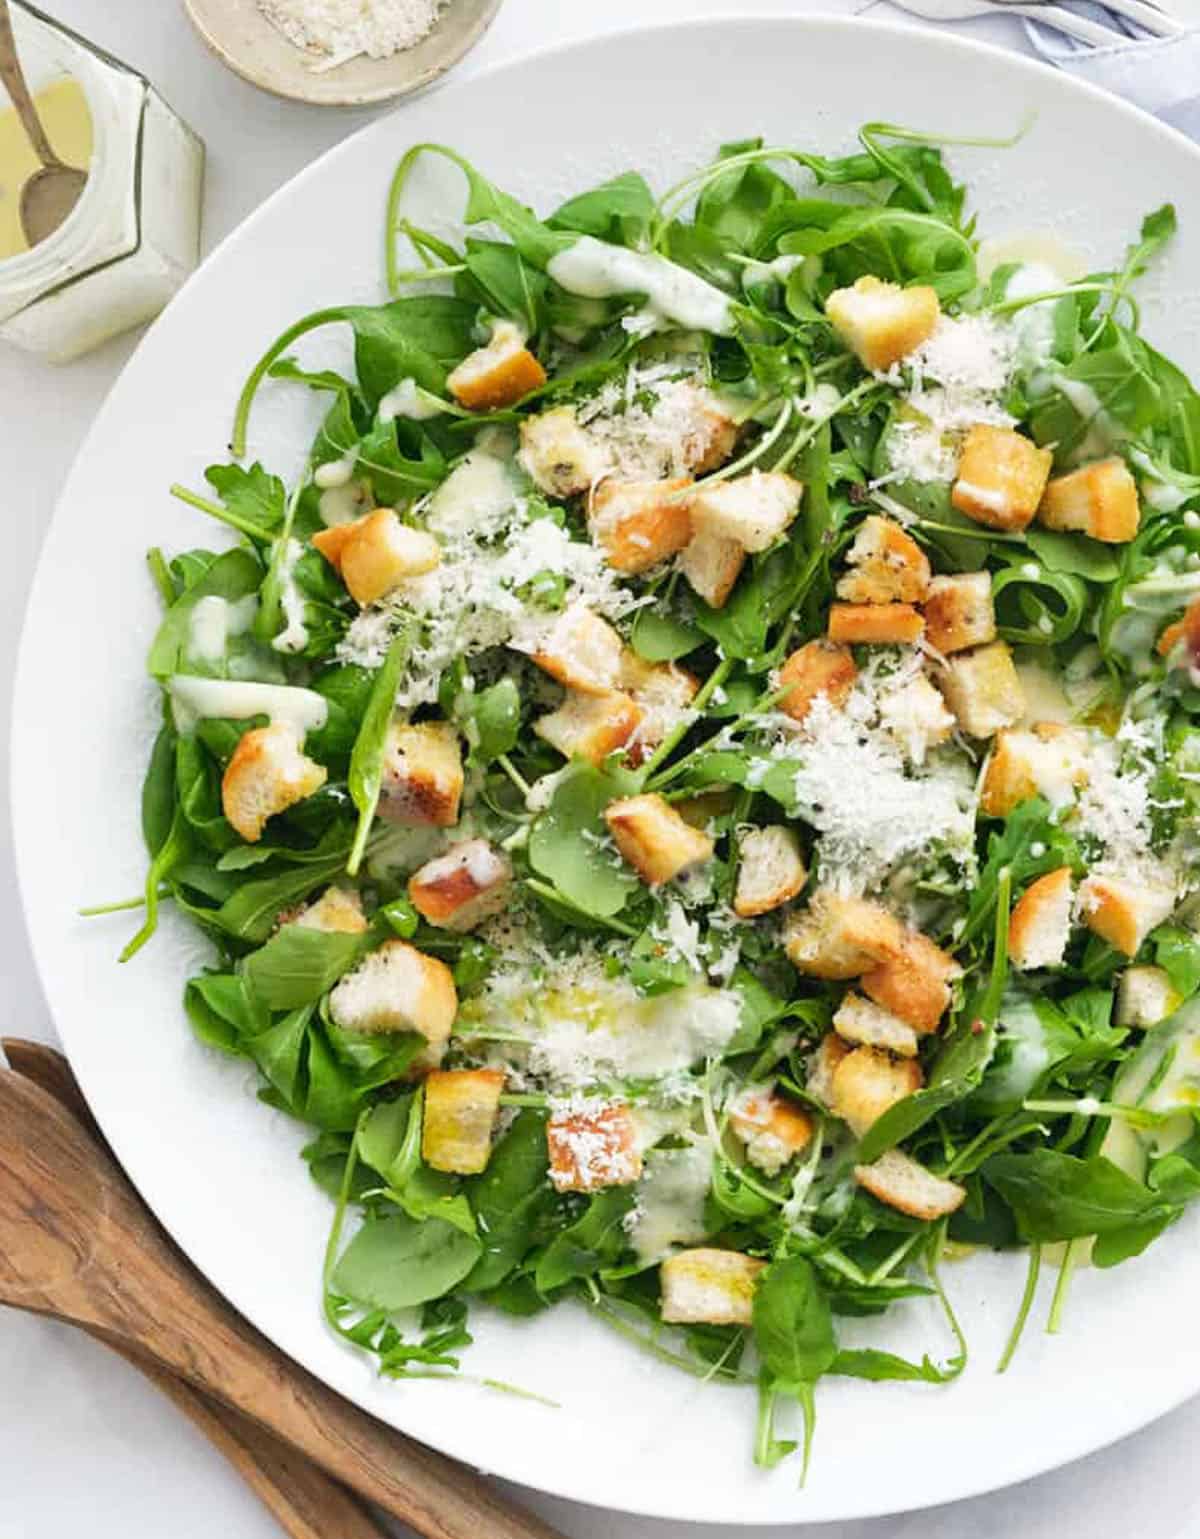 Top view of a large salad plate full of spinach arugula salad topped with parmesan and croutons.